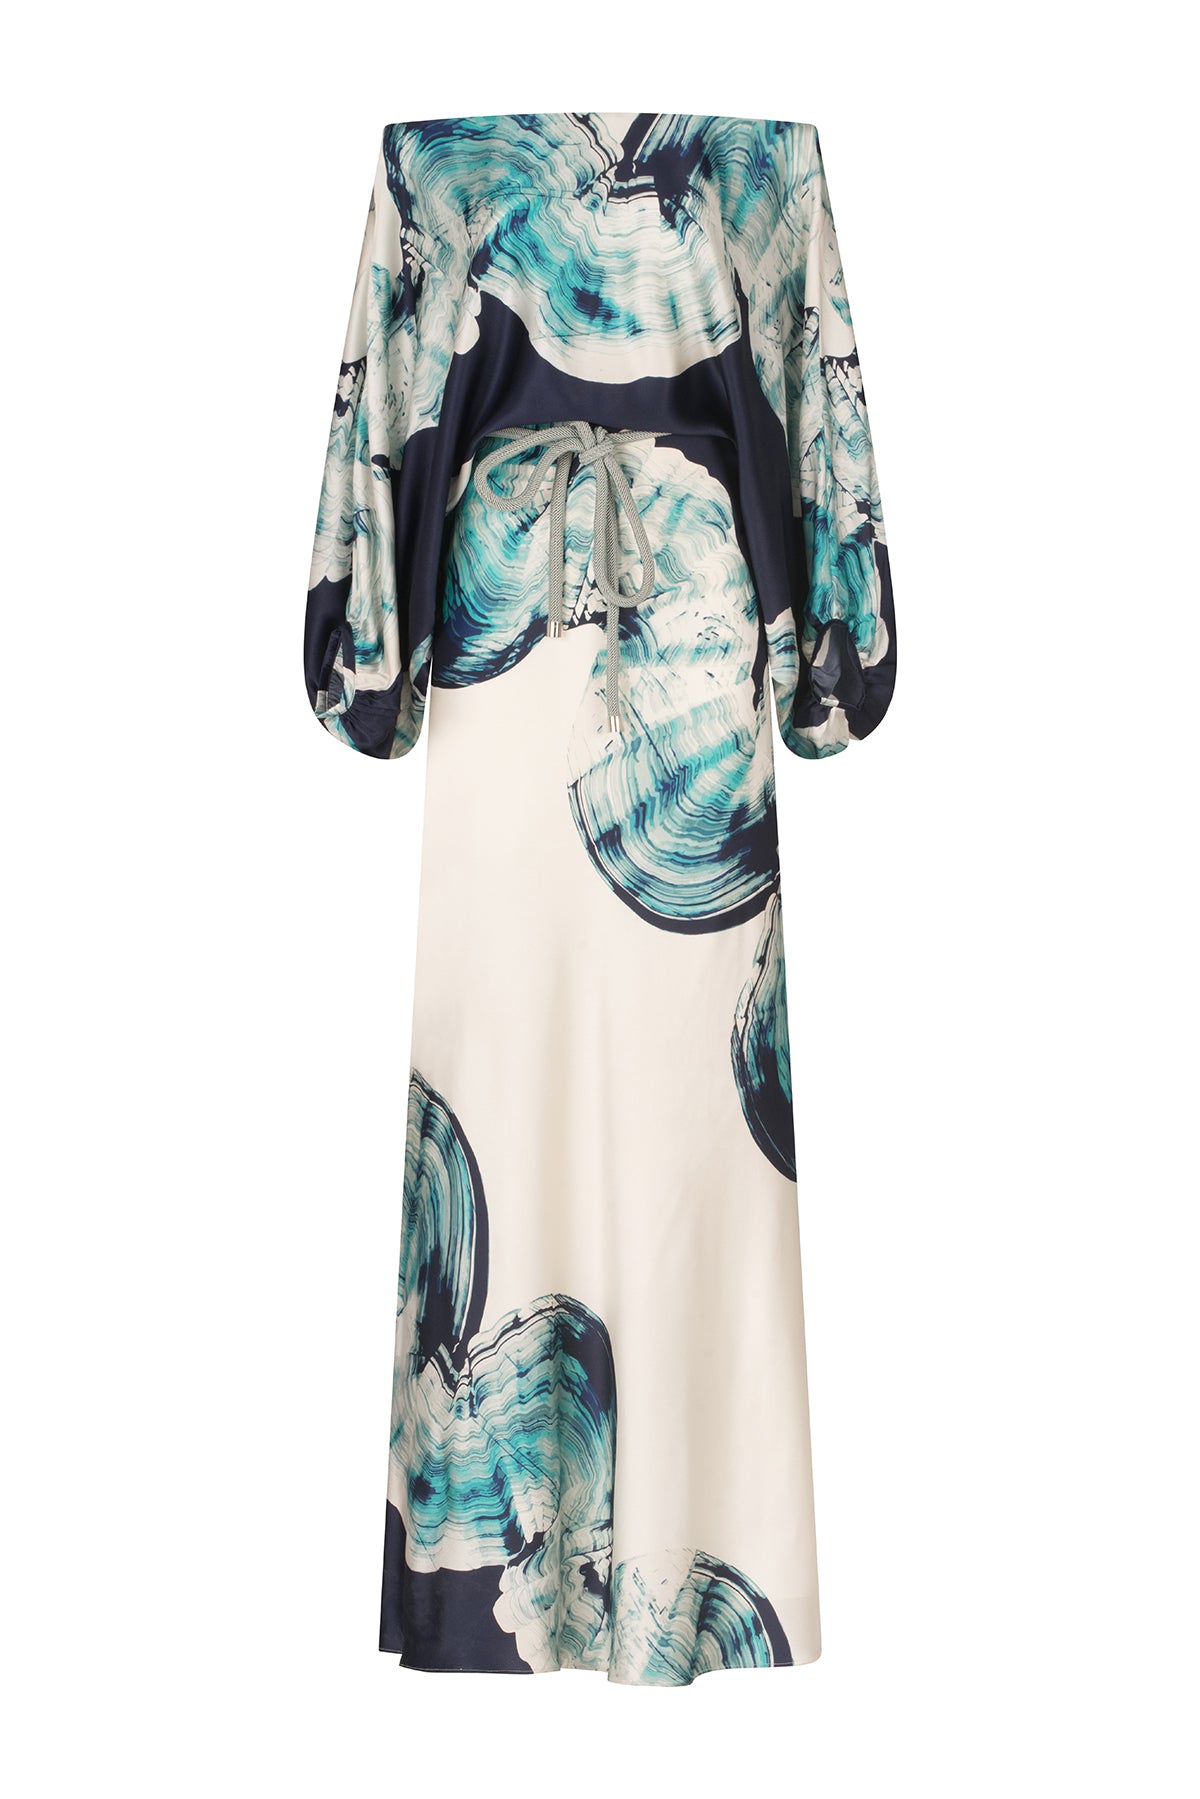 An elegant off-the-shoulder Rossi Dress Navy Abstract Wave featuring a blue and white abstract print on silk fabric.